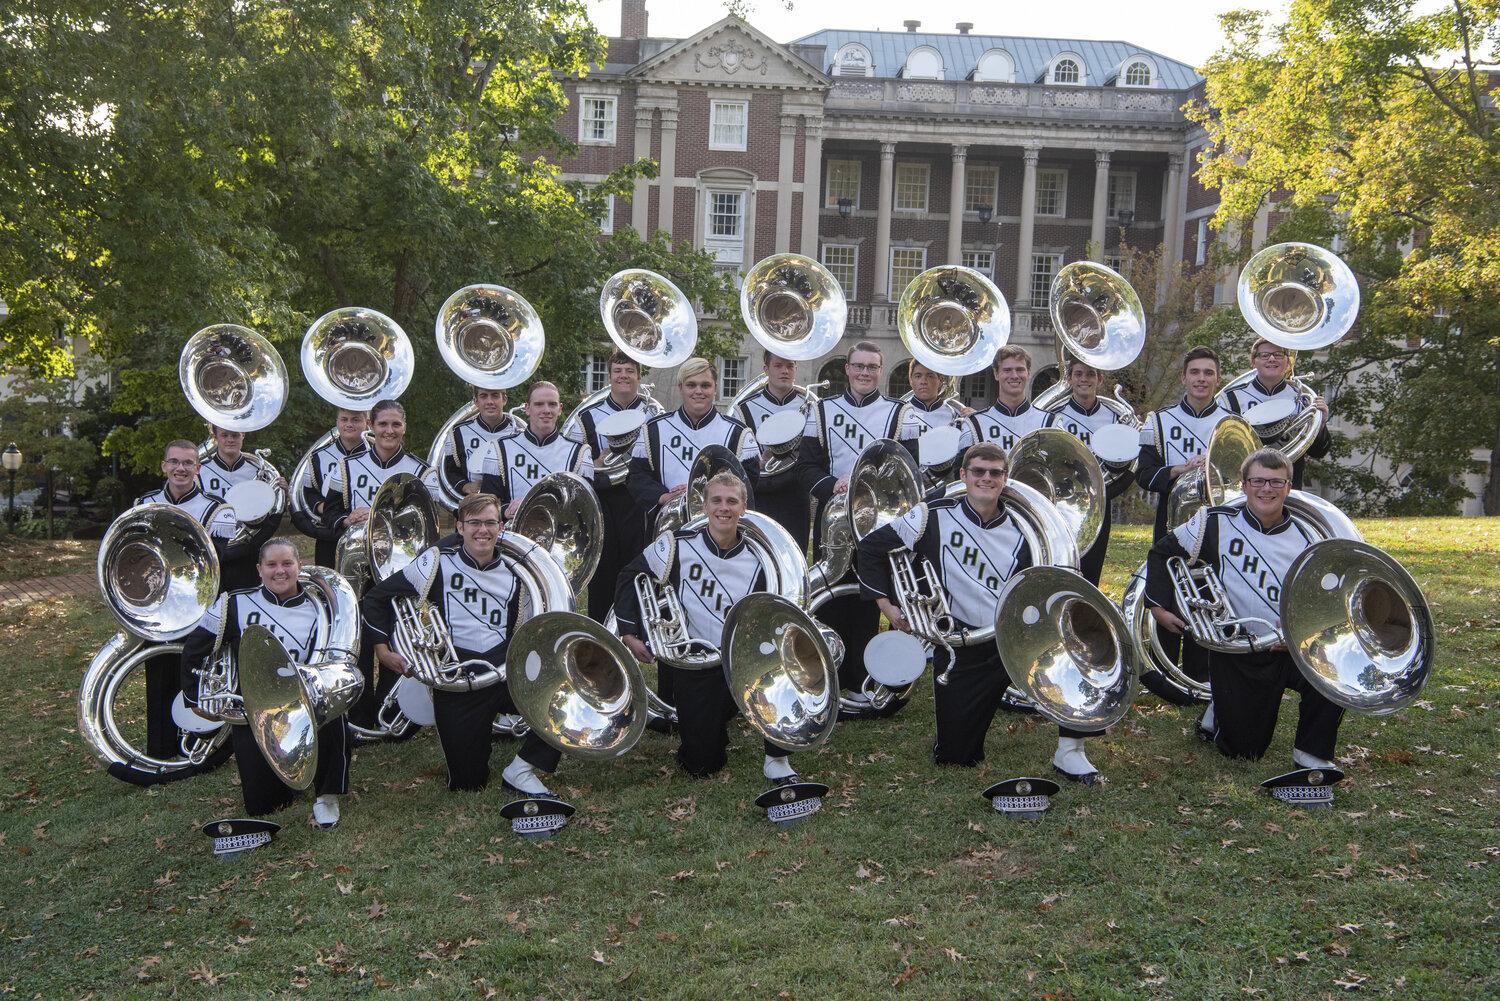 Marching 110 sousaphone players